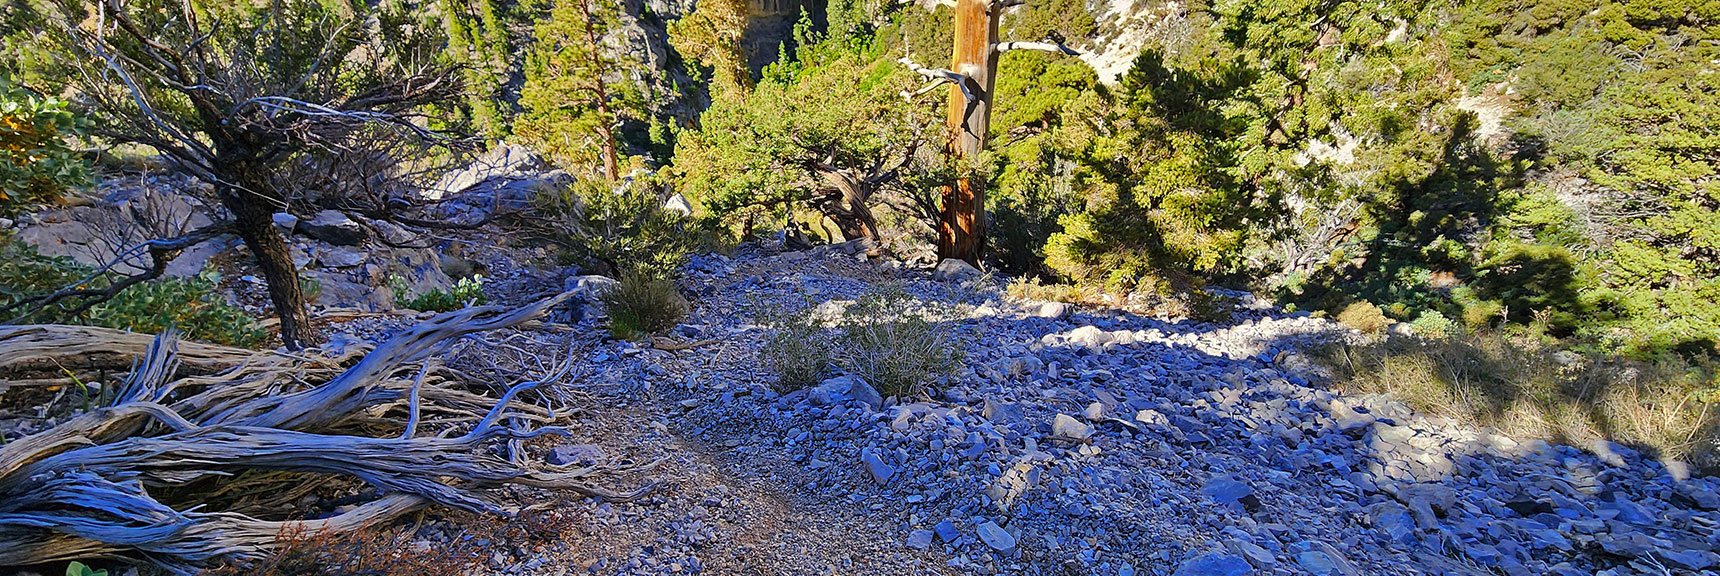 I Wrongly Tried to Navigate Above the Gully. Should Have Stayed in the Gully. | Fletcher Canyon / Fletcher Peak / Cockscomb Ridge Circuit | Mt. Charleston Wilderness | Spring Mountains, Nevada